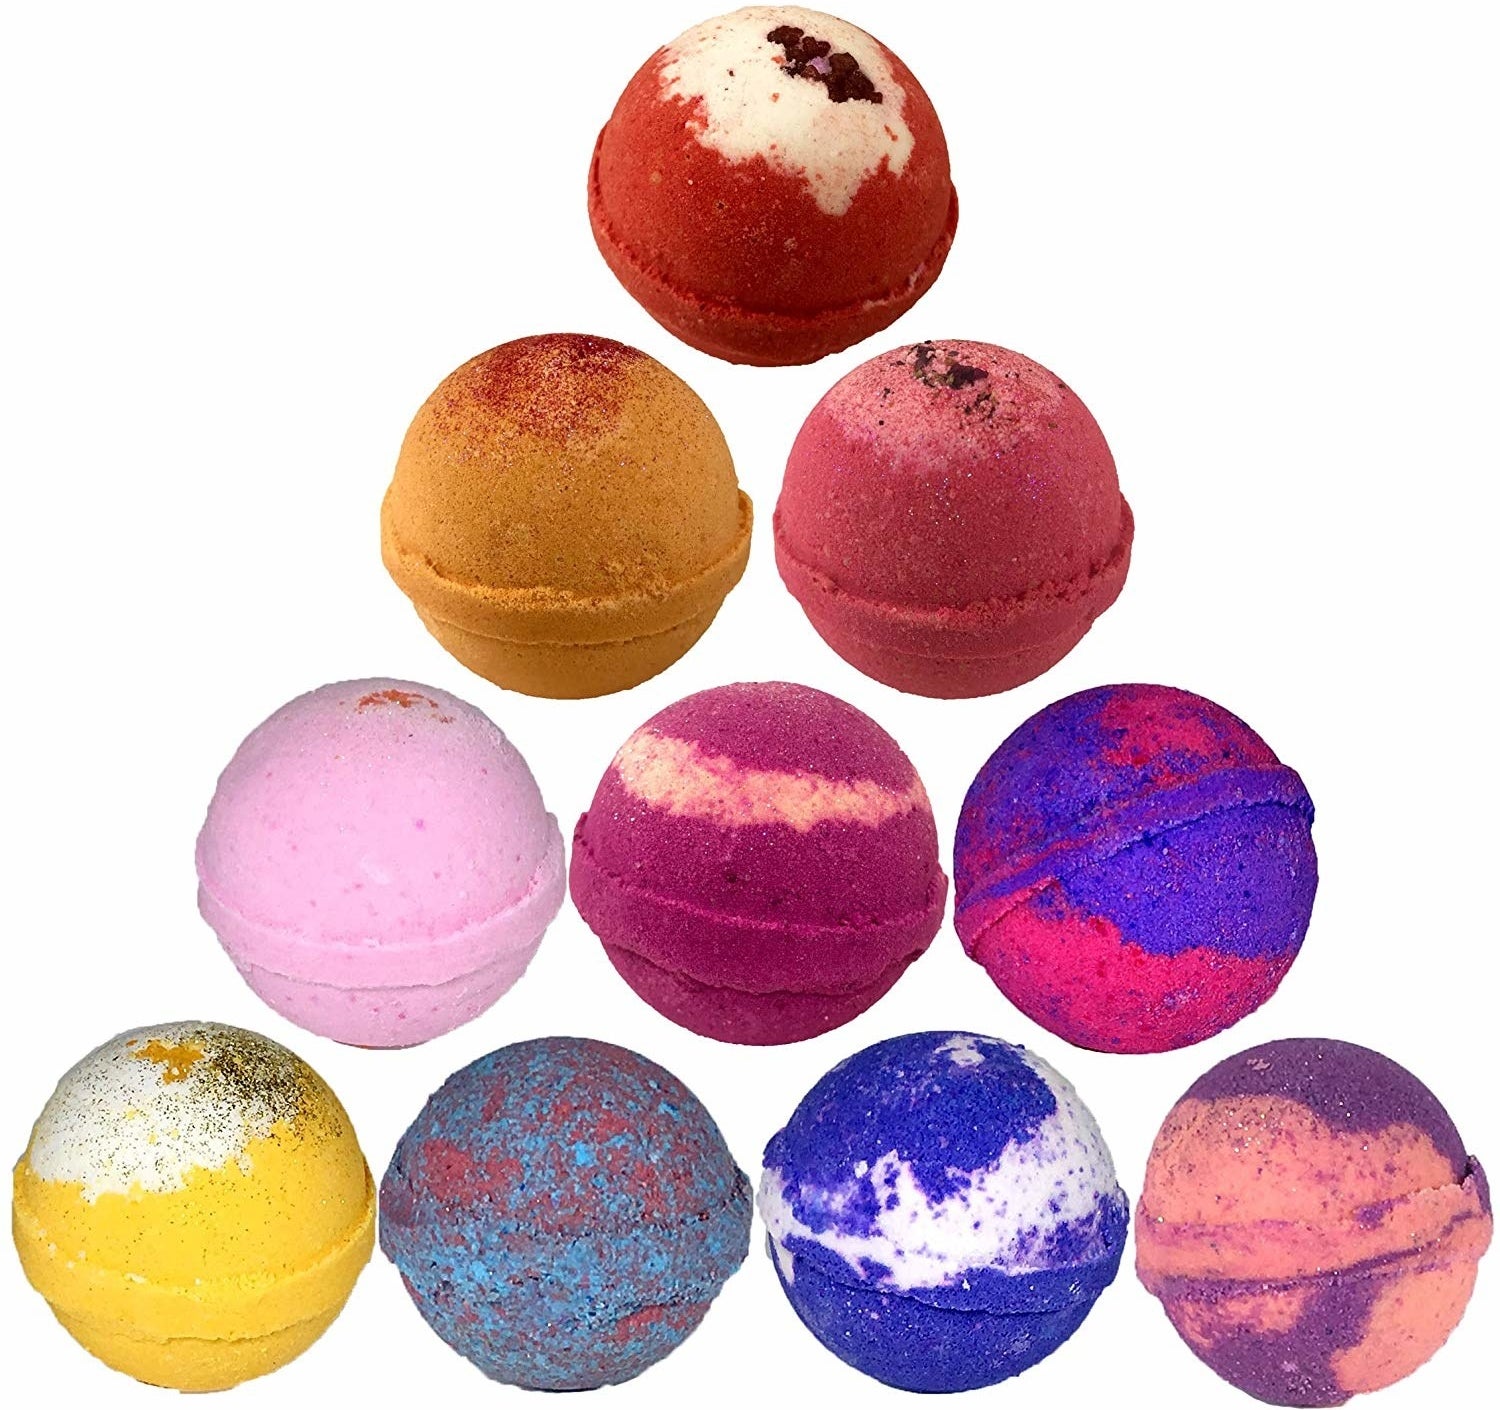 15 Of The Best Bath Bombs You Can Get On Amazon